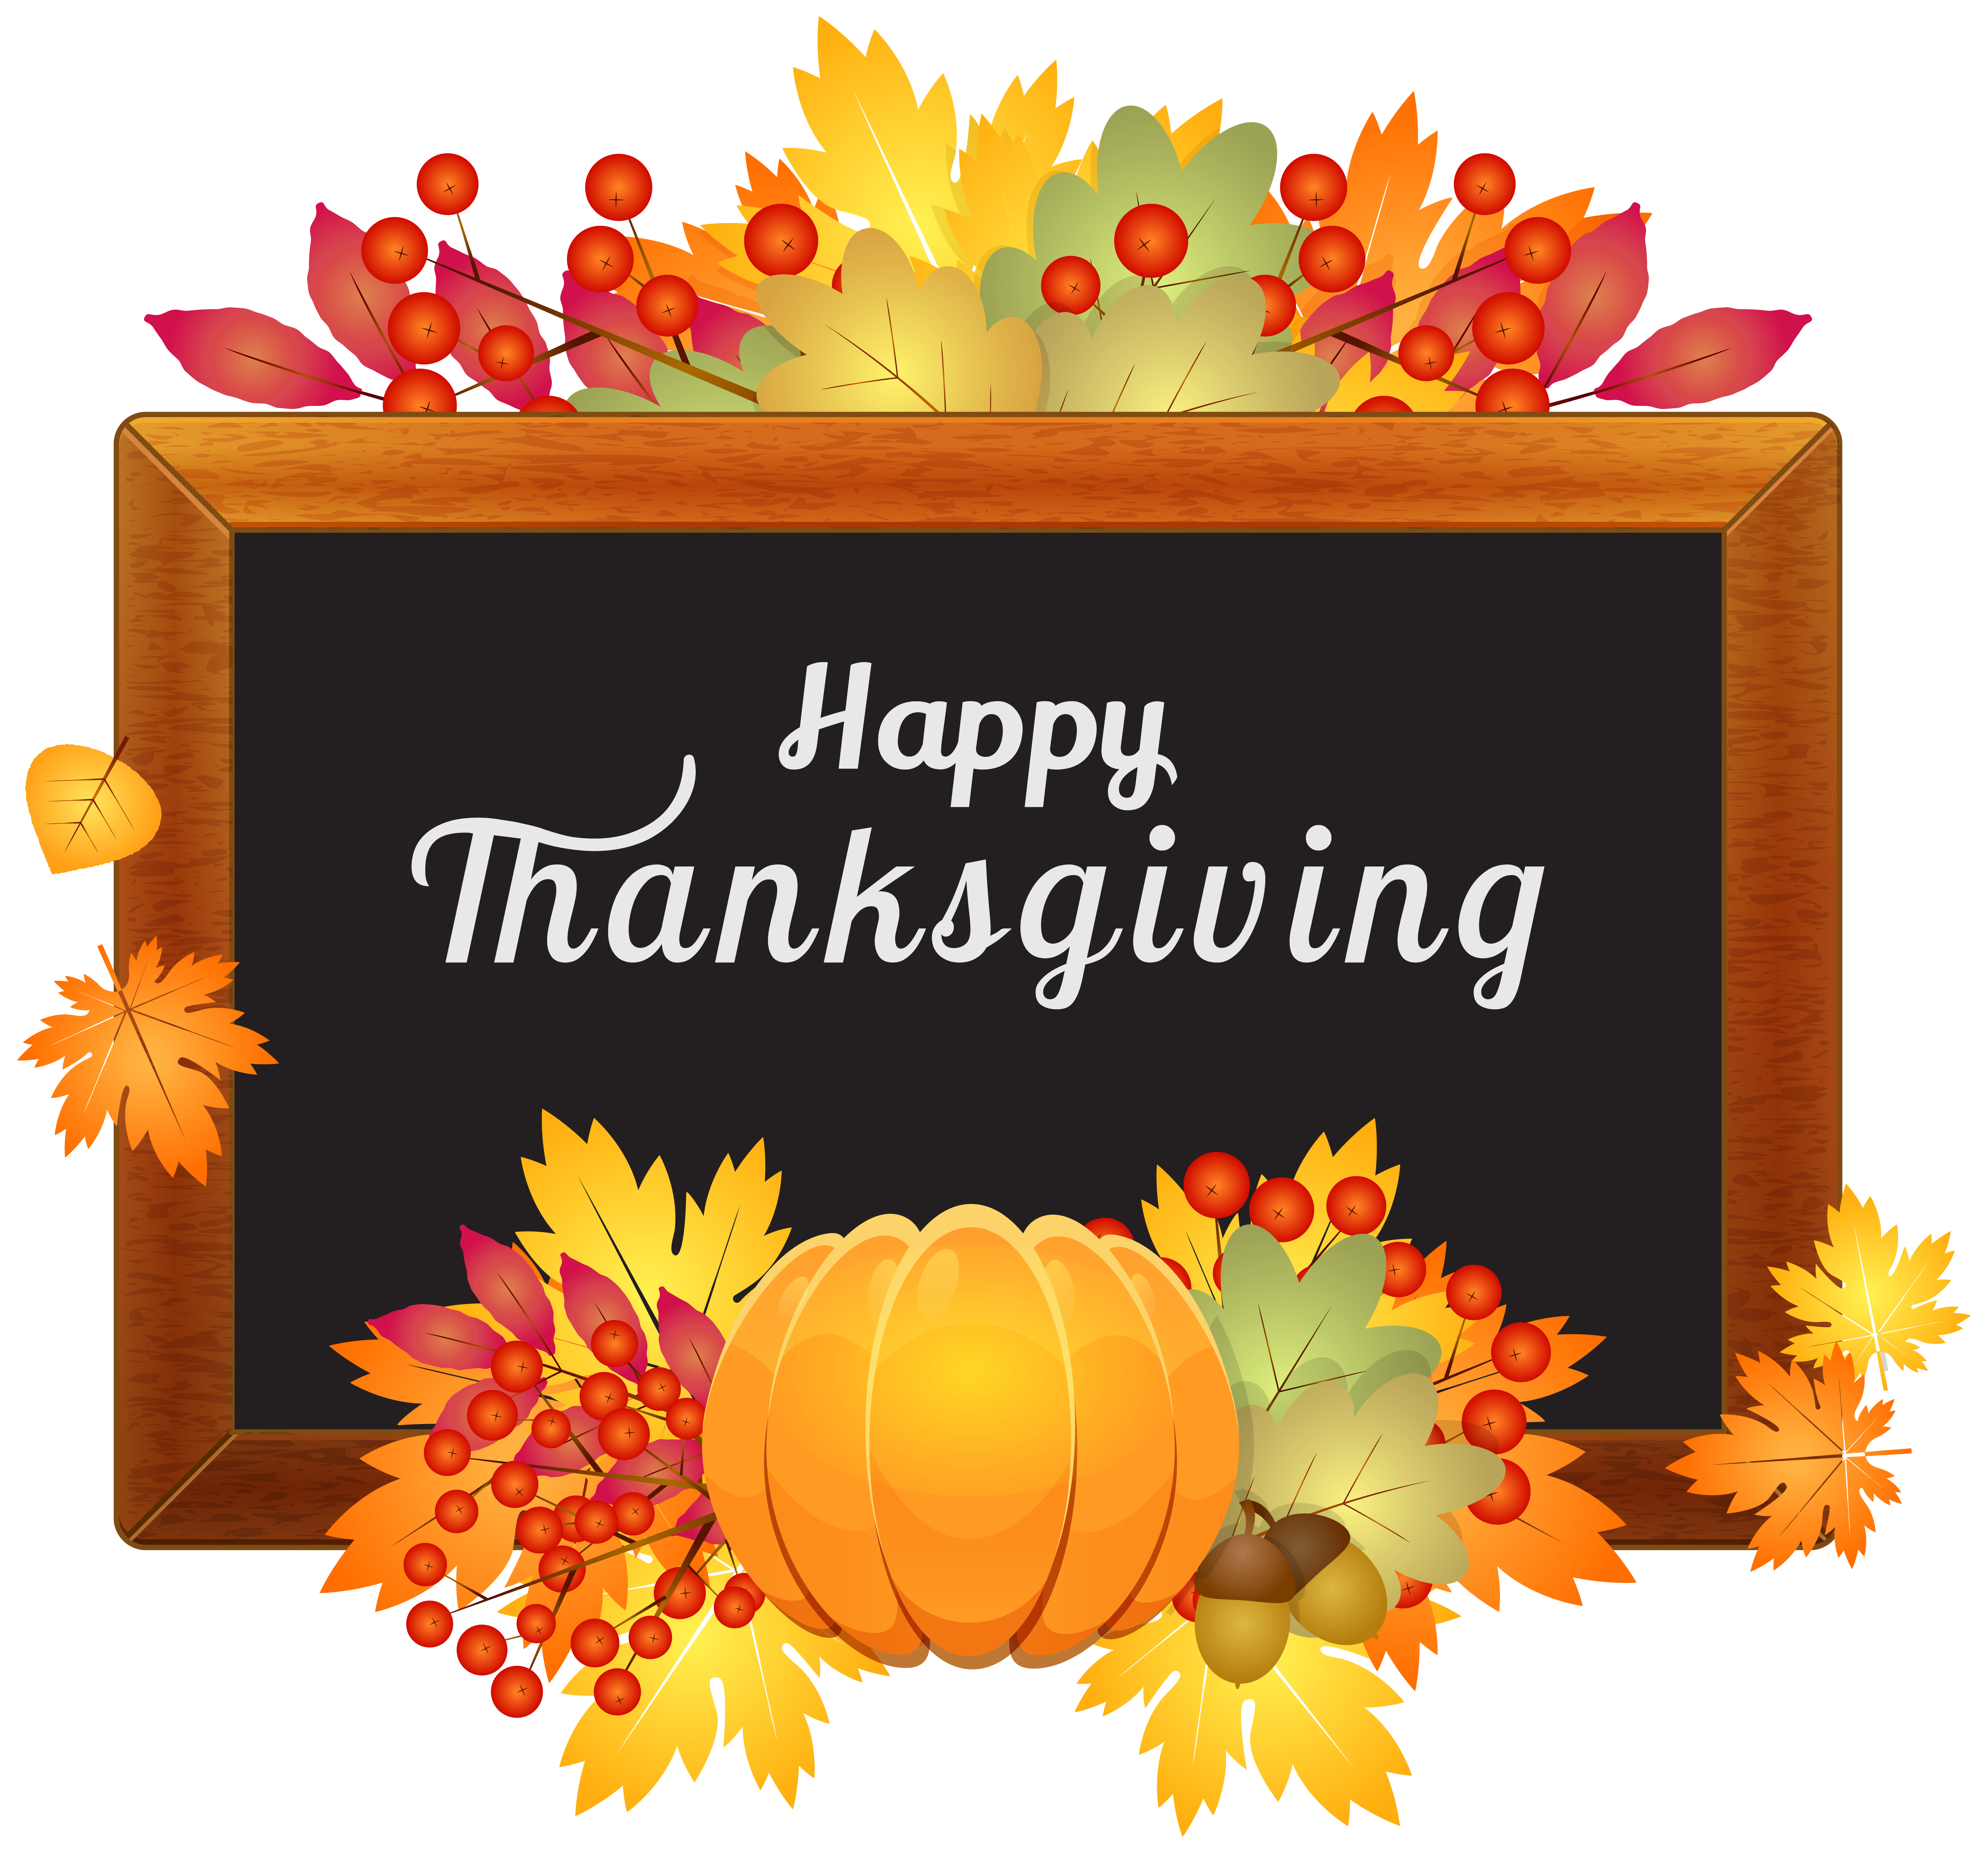 Happy Thanksgiving Decor Png Clipart Image   Thanks Giving Hd Png - Thanks Images, Transparent background PNG HD thumbnail